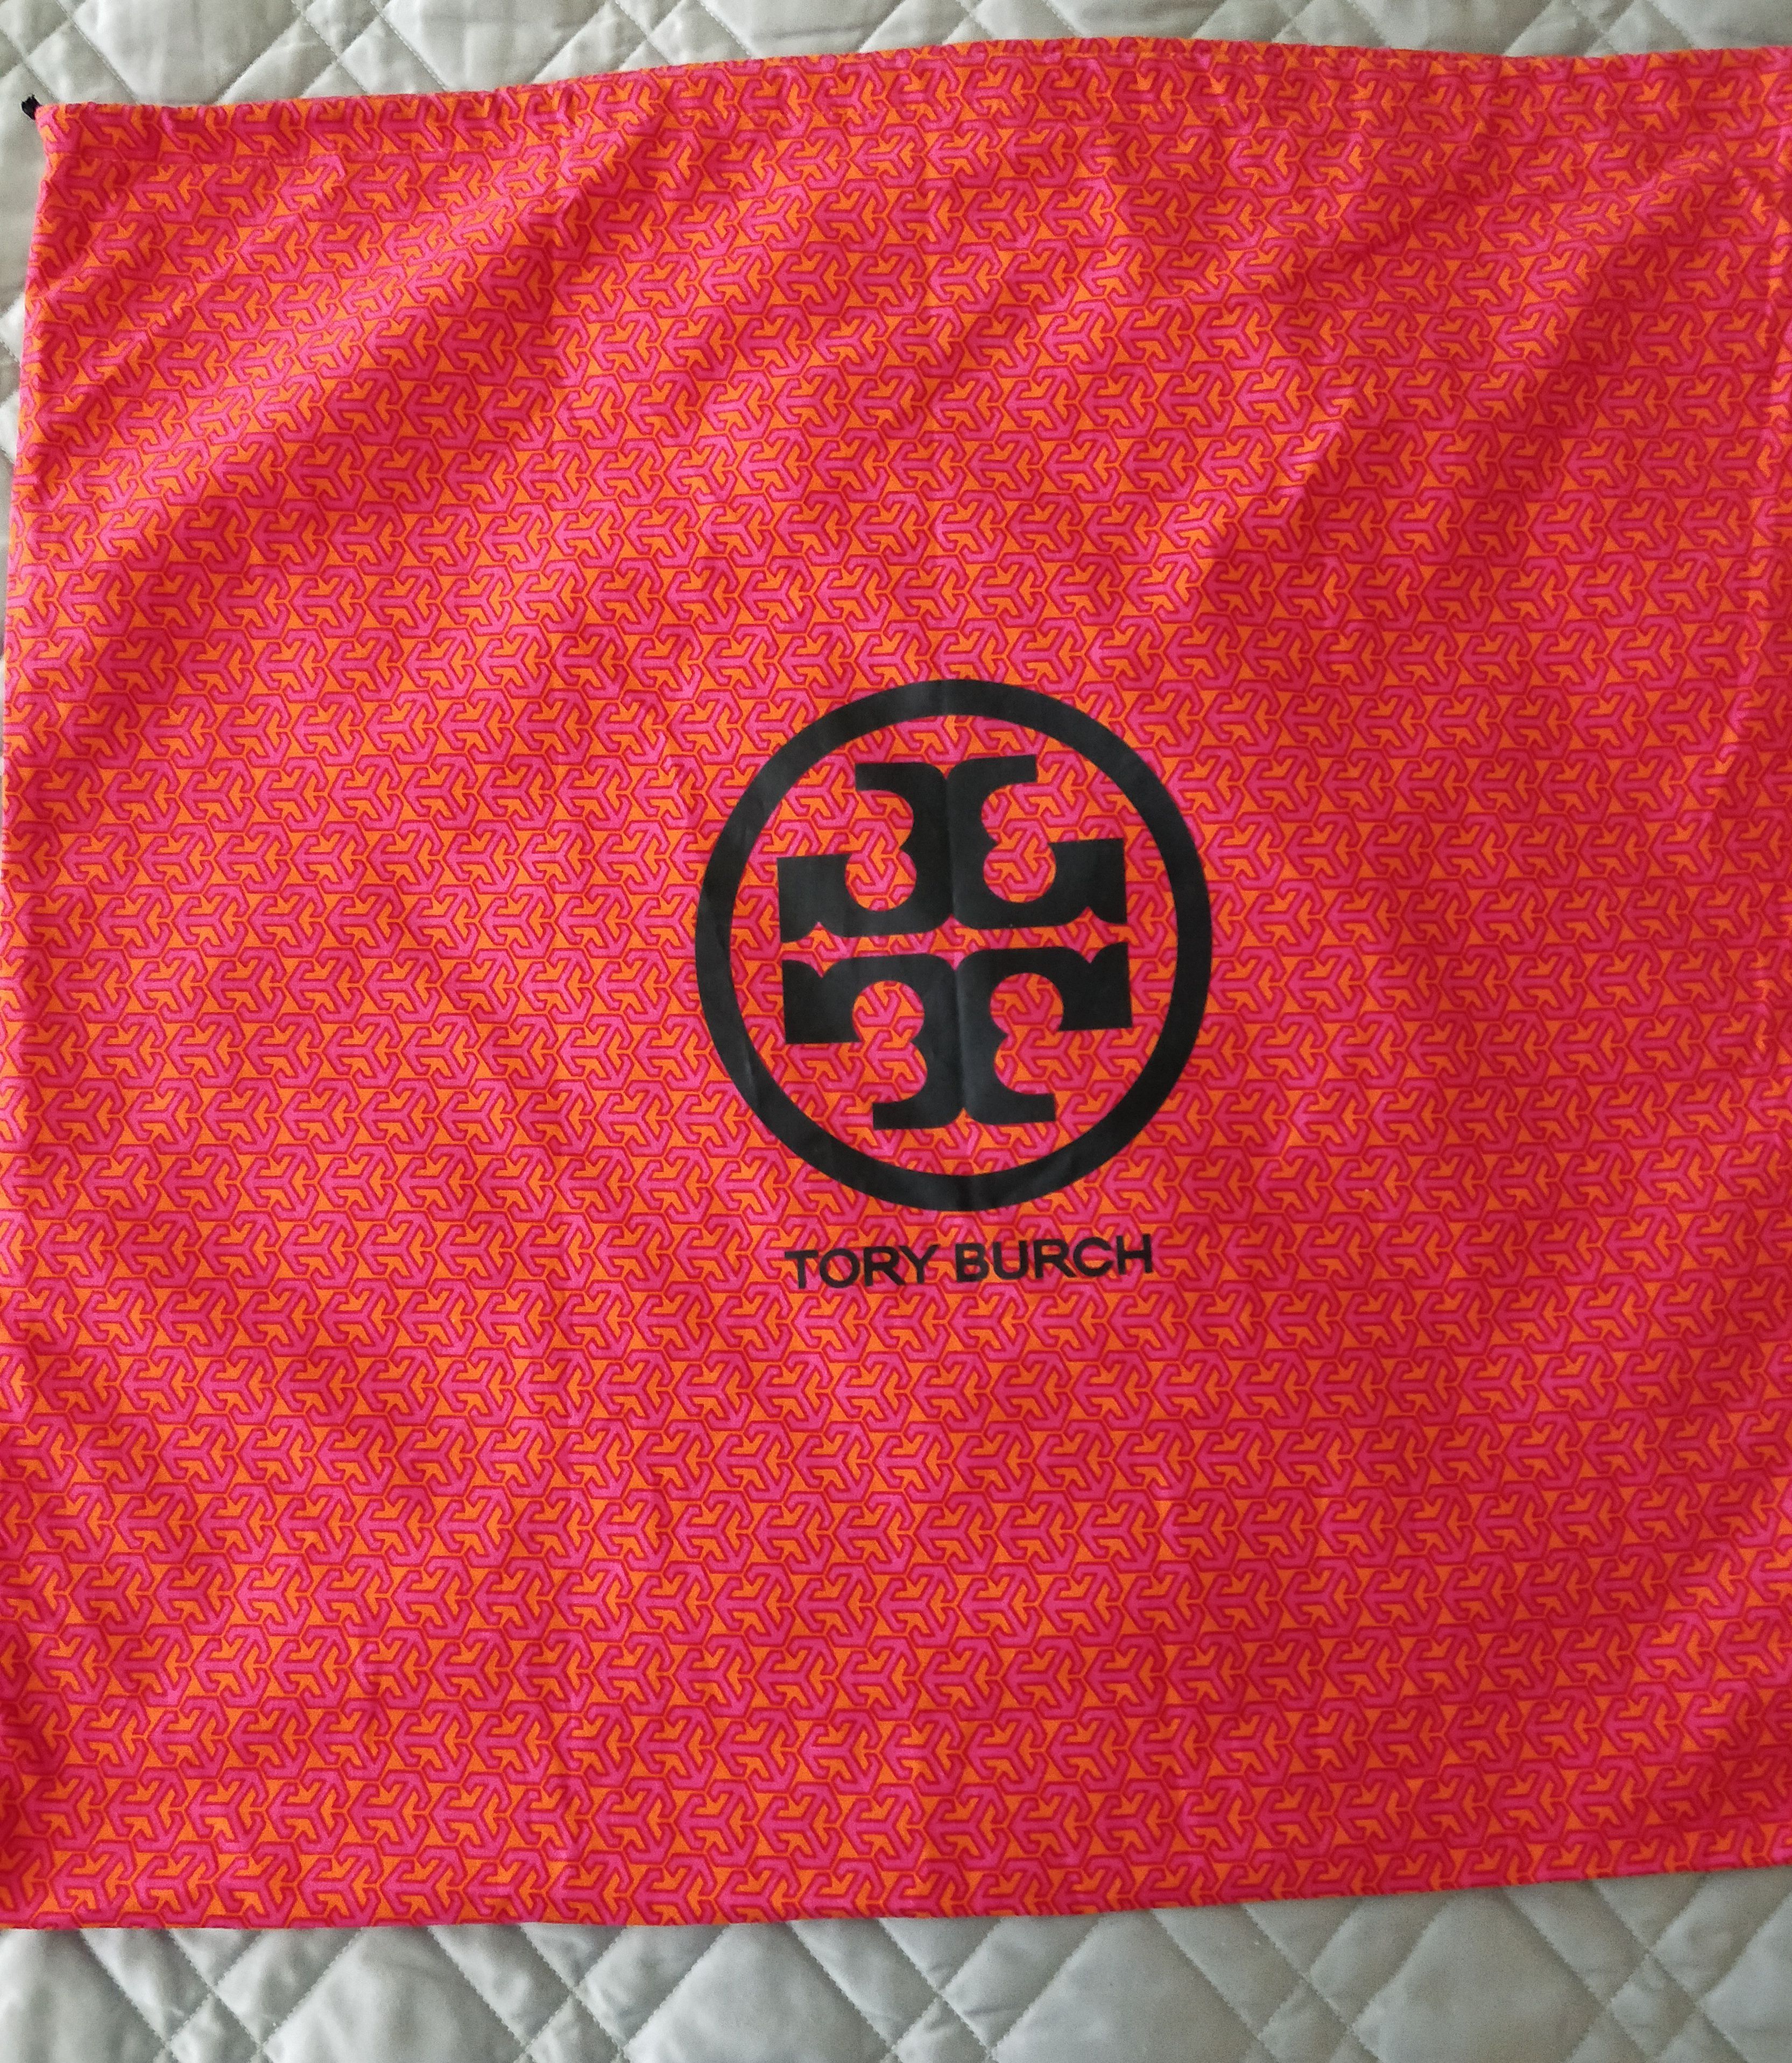 Toryburch, Bags